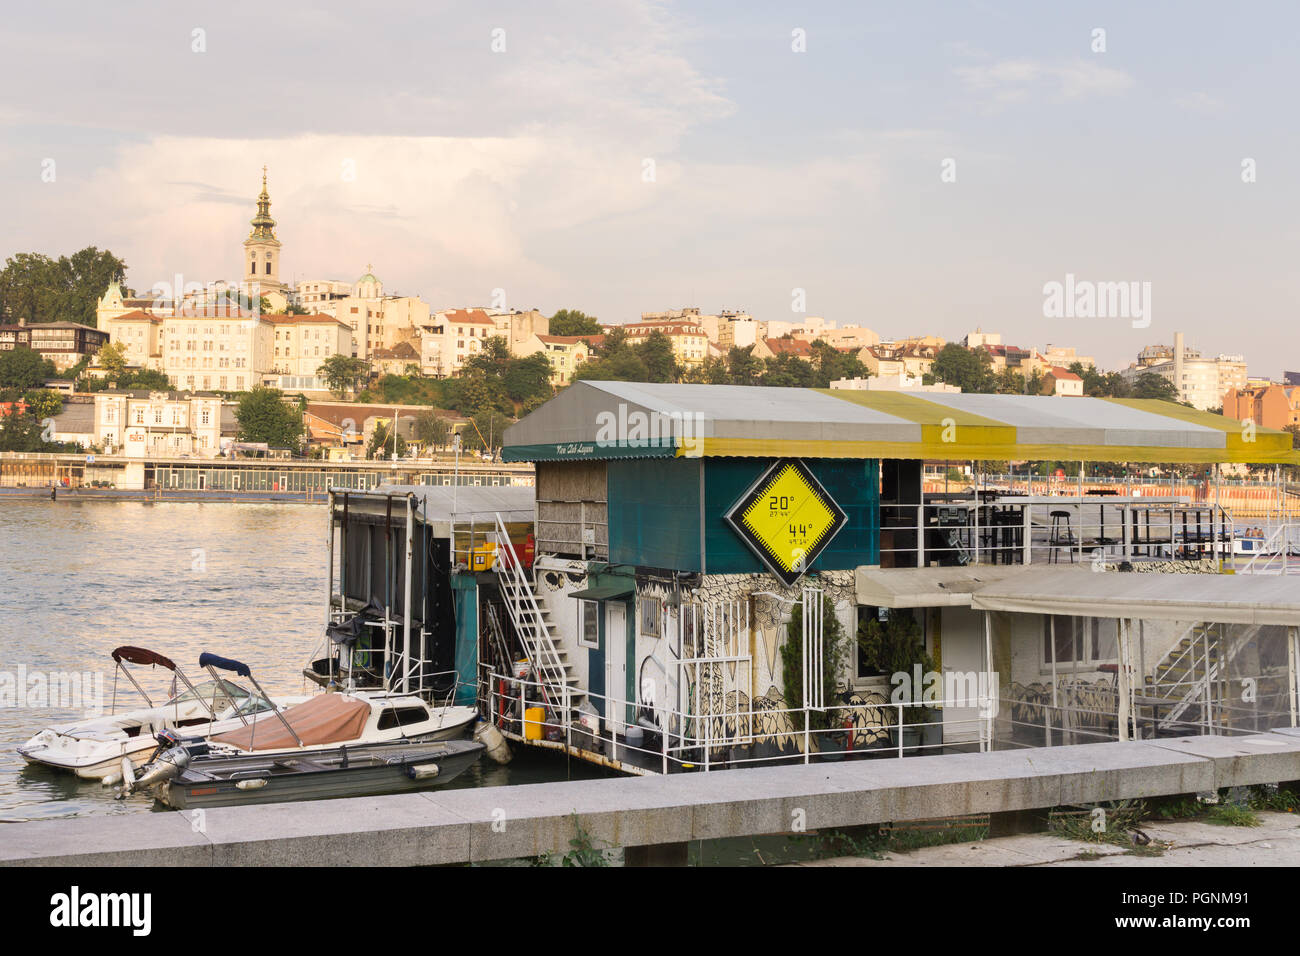 Belgrade boat club 20/44 on the Sava River with a view of the Old Town. Serbia. Stock Photo